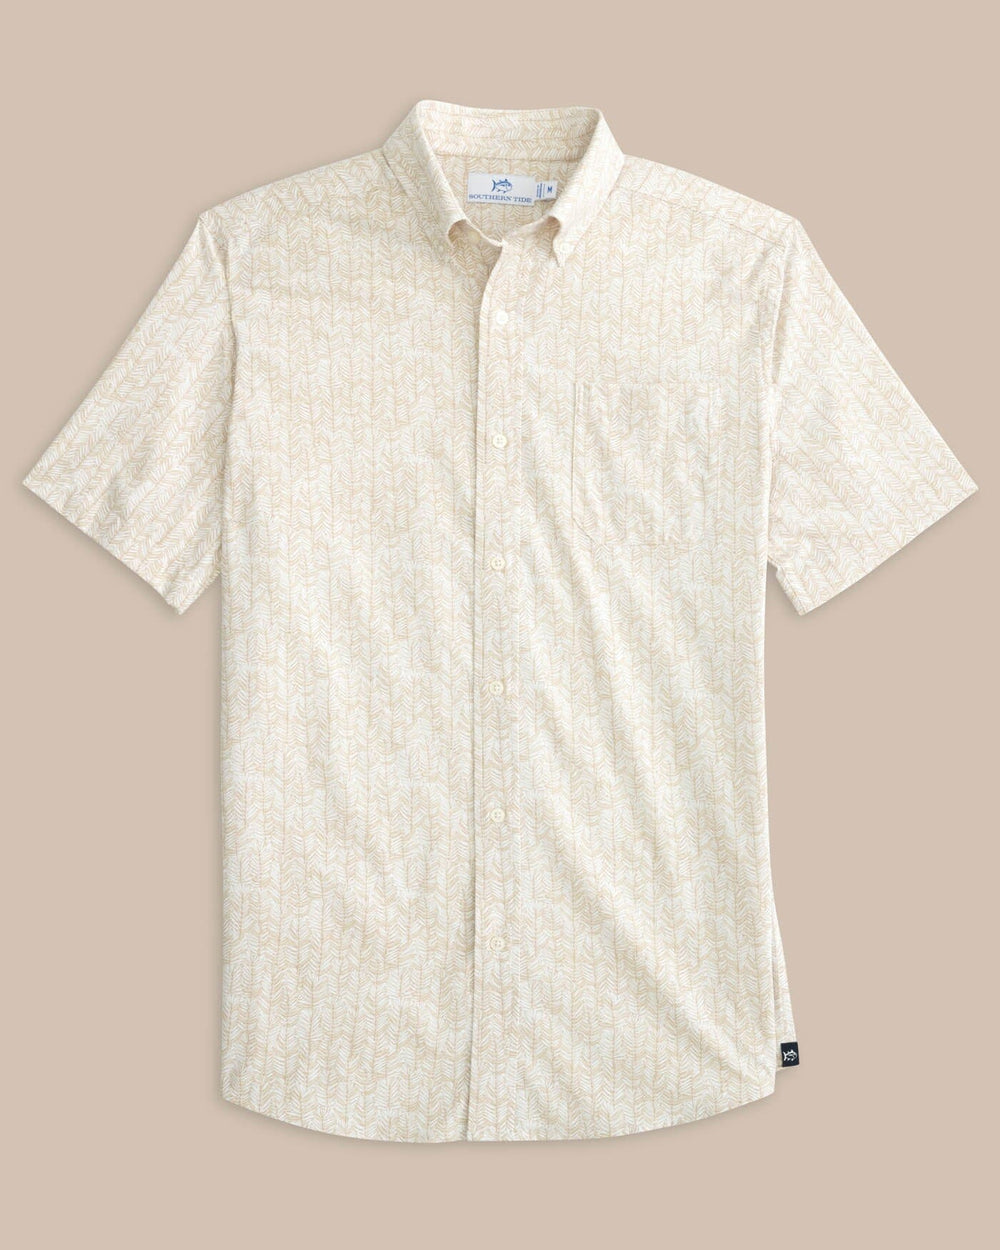 The front view of the Southern Tide Leagally Frond Intercoastal Short Sleeve Sport Shirt by Southern Tide - Whitecap Khaki